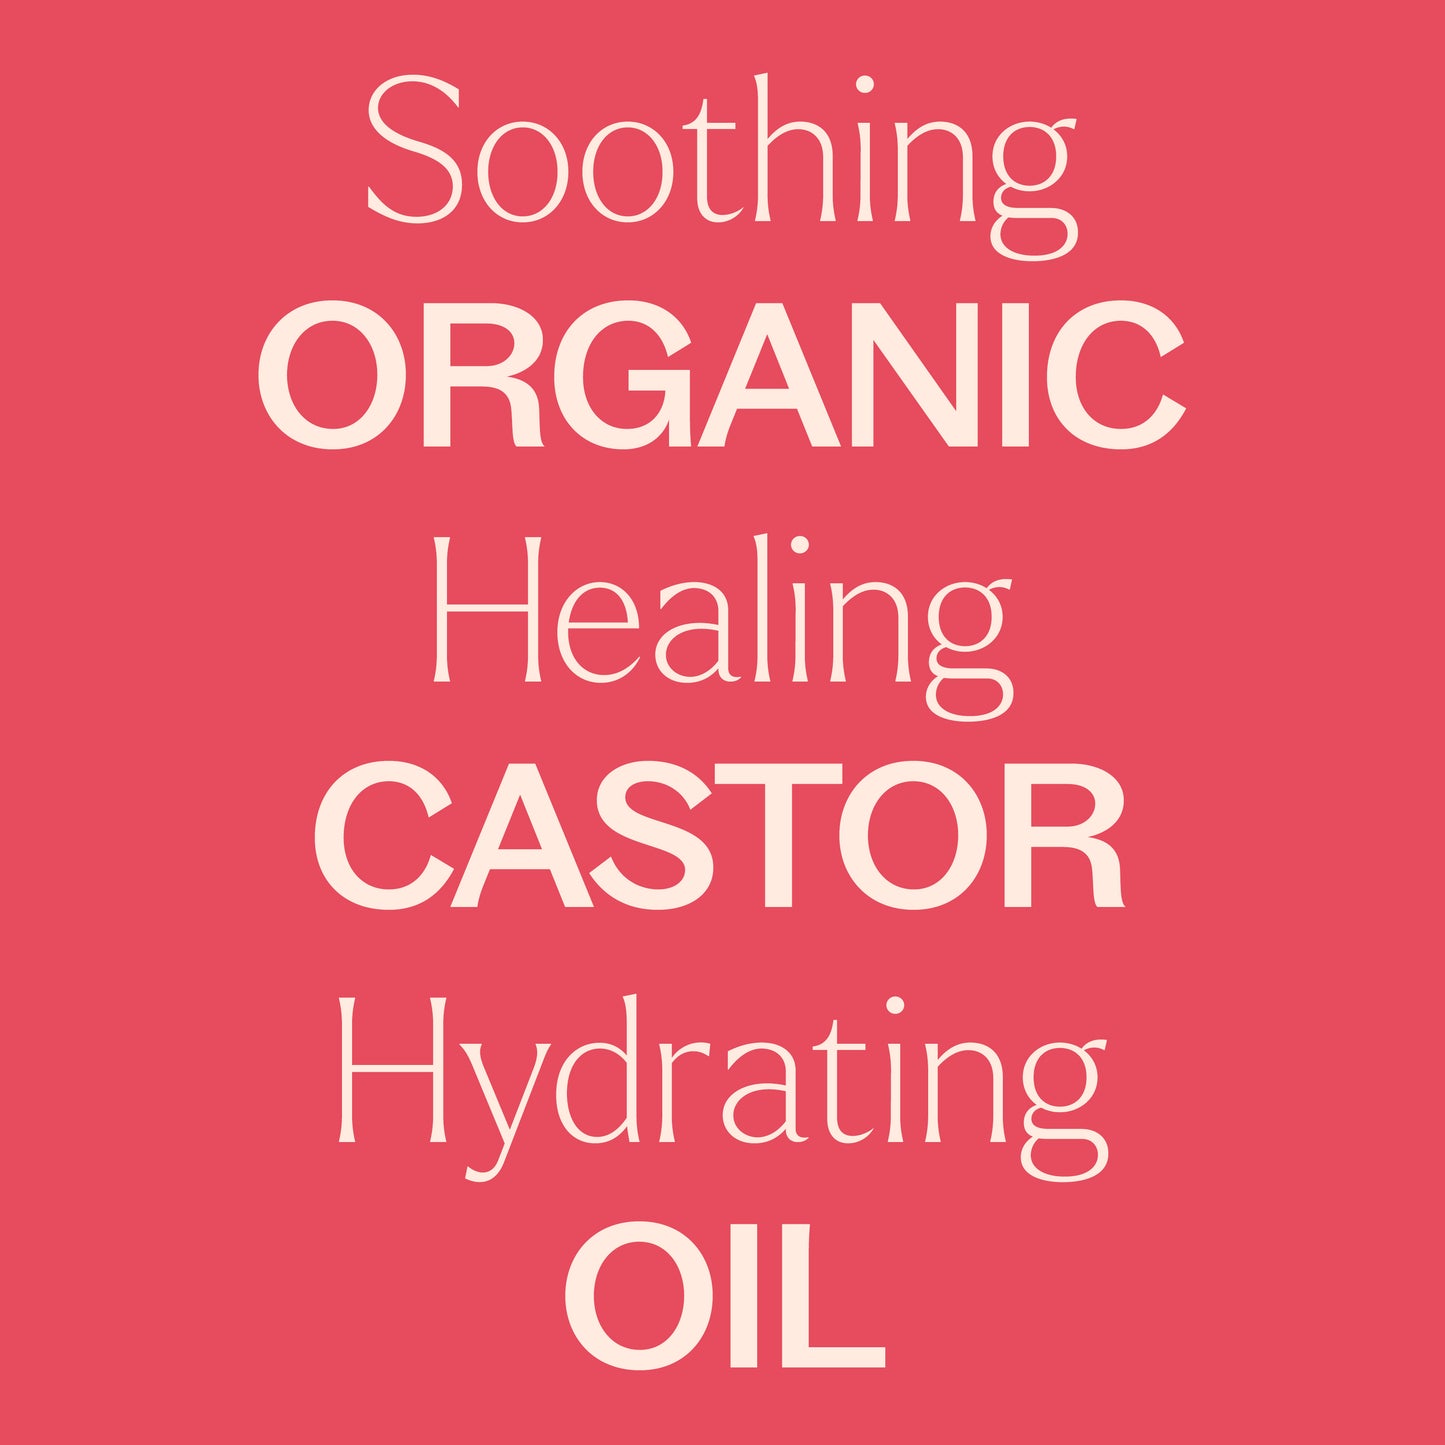 Oganic castor oil. Soothing, healing, hydrating